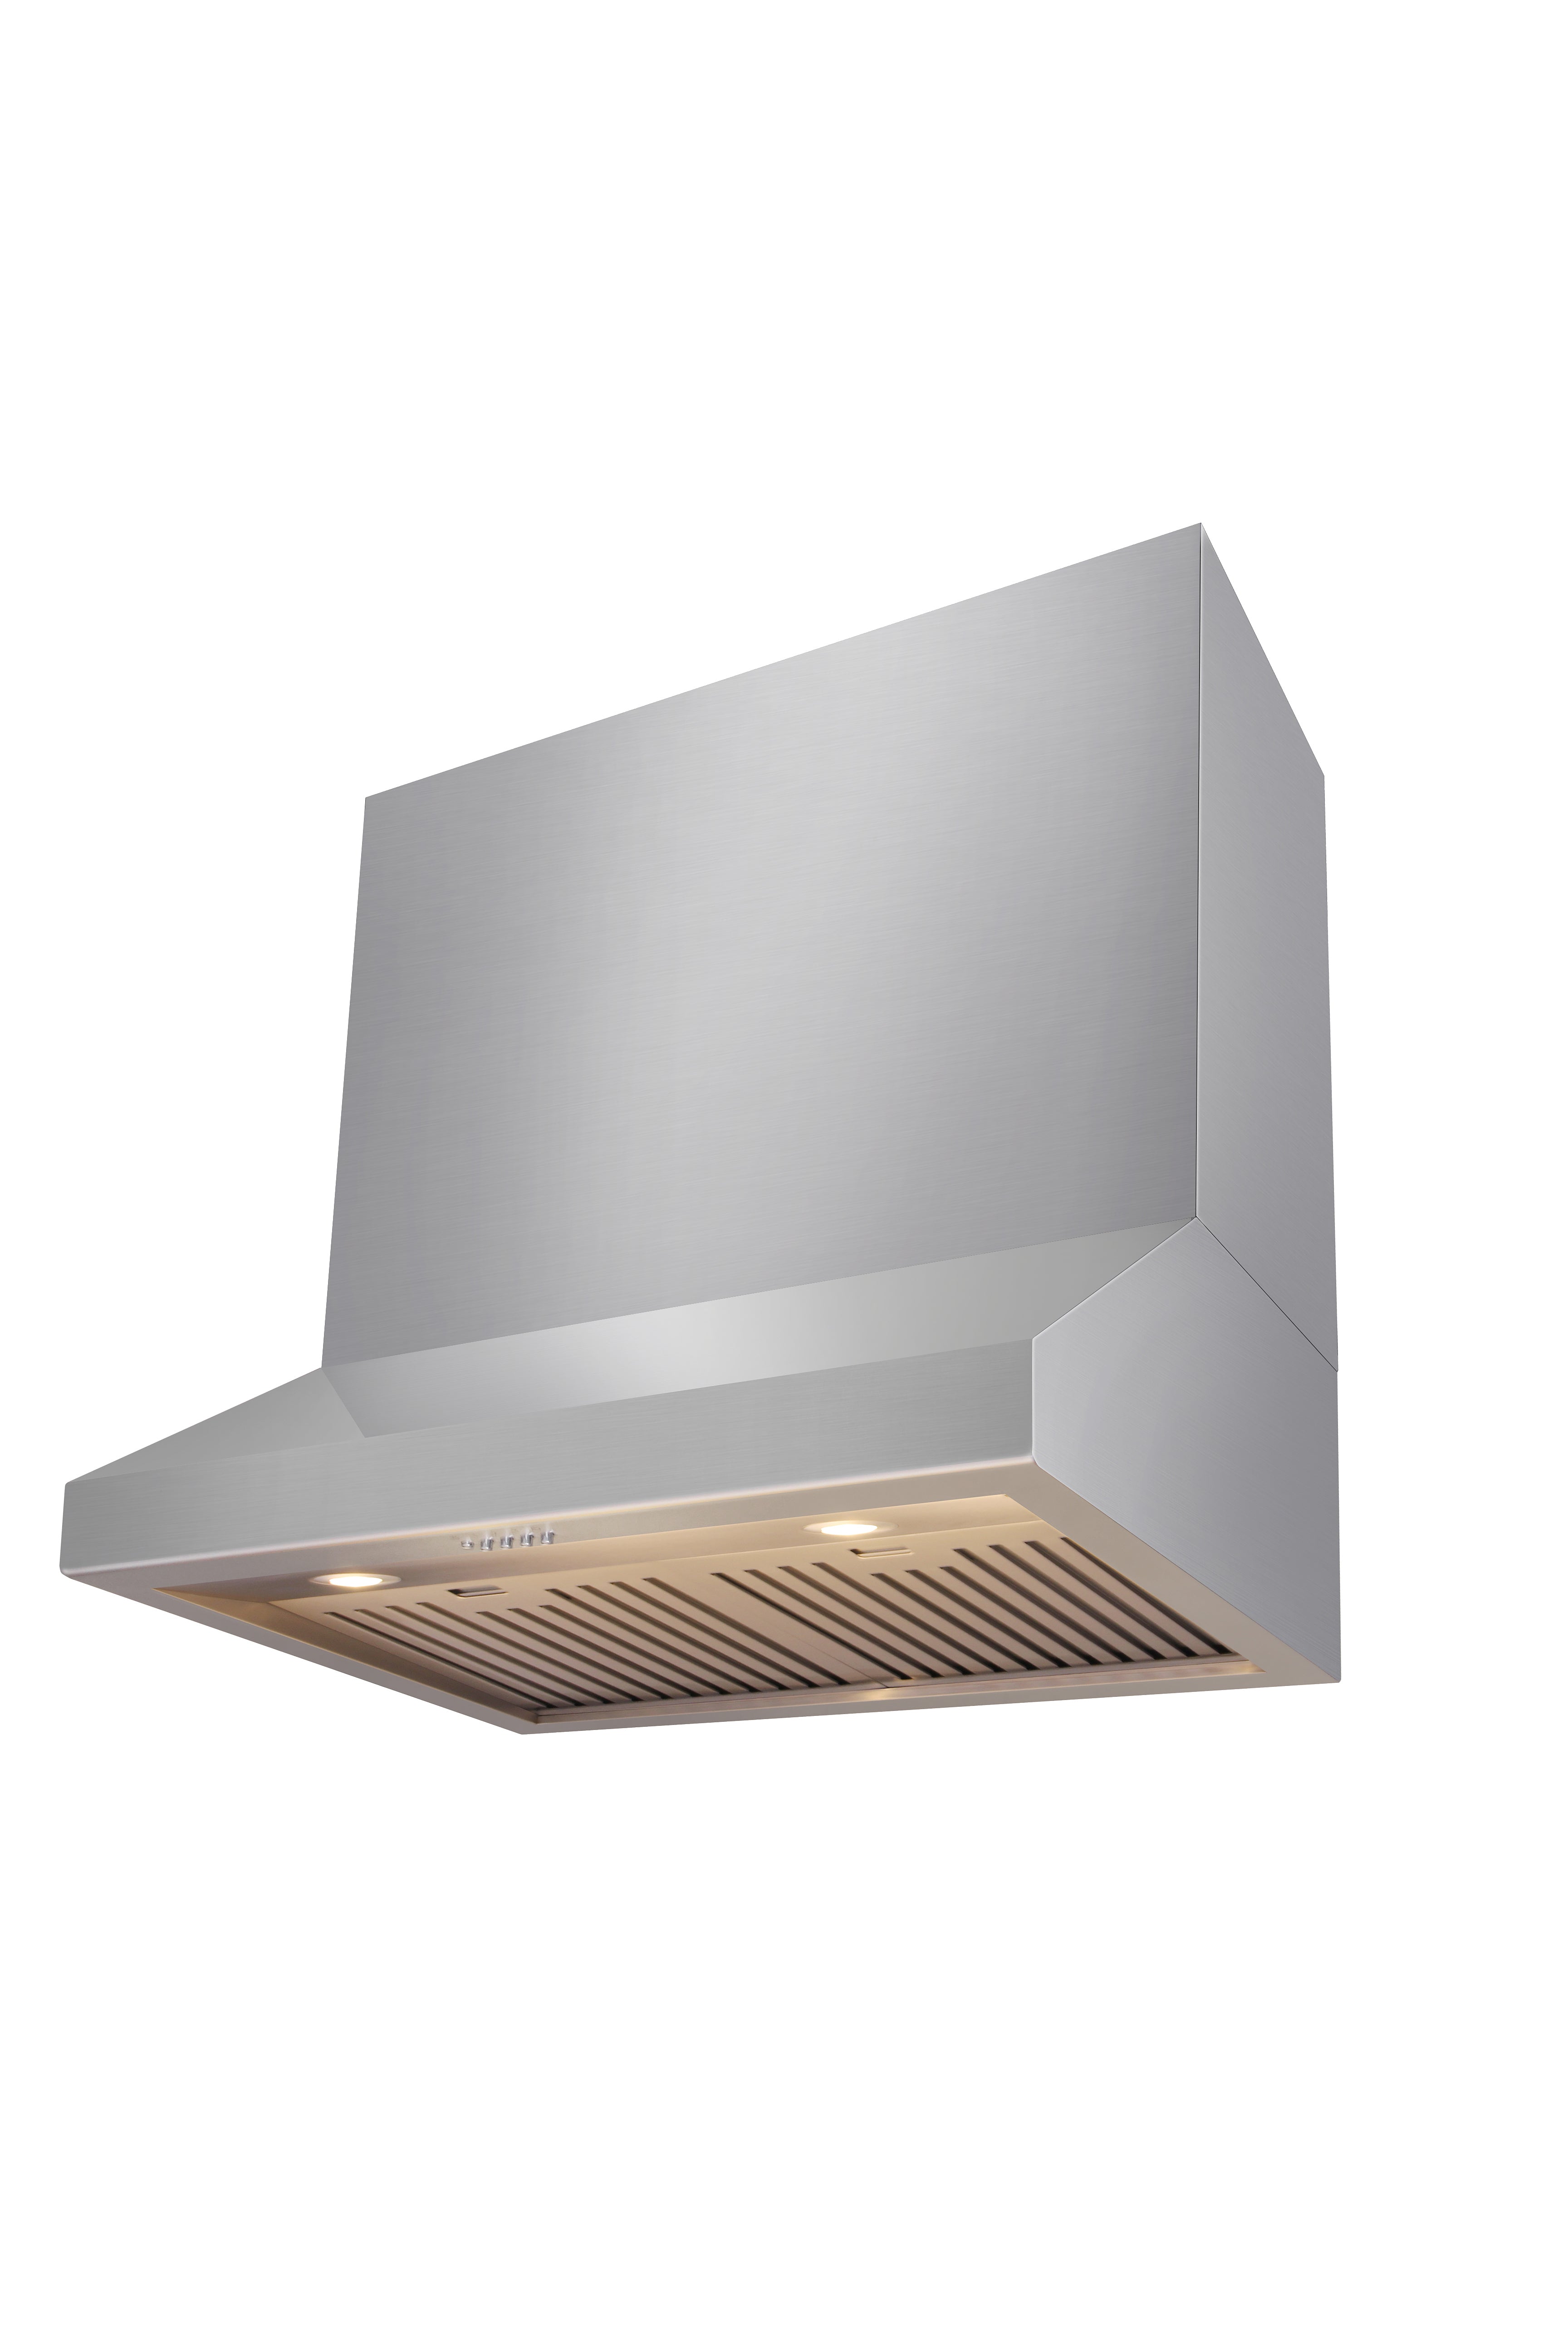 Thor Kitchen  30 Inch Professional Range Hood, 11 Inches Tall in Stainless Steel- Model TRH3006 (Renewed)